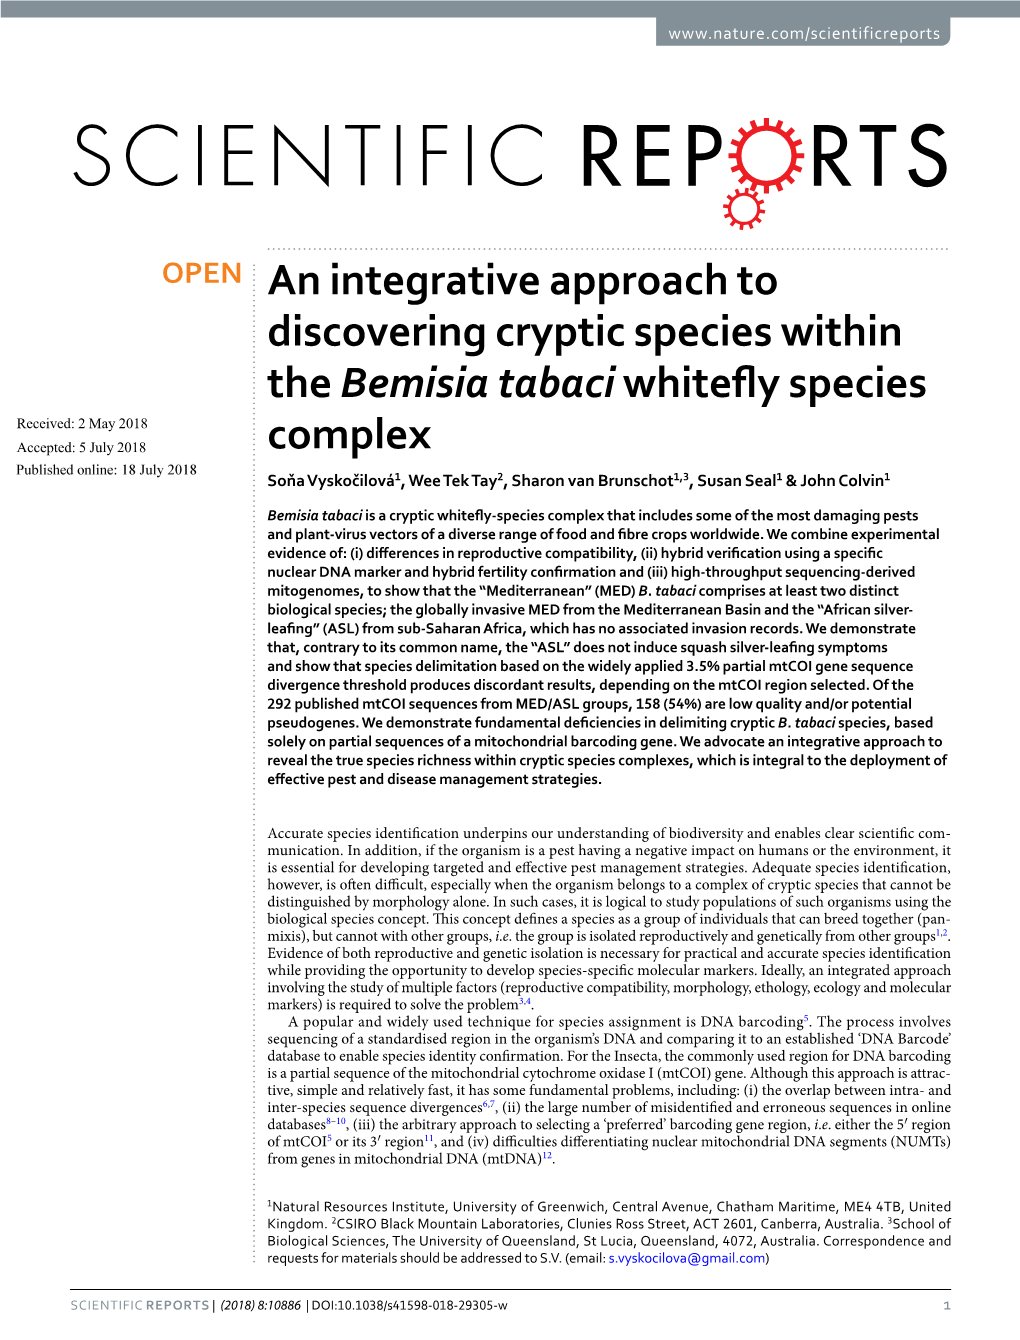 An Integrative Approach to Discovering Cryptic Species Within the Bemisia